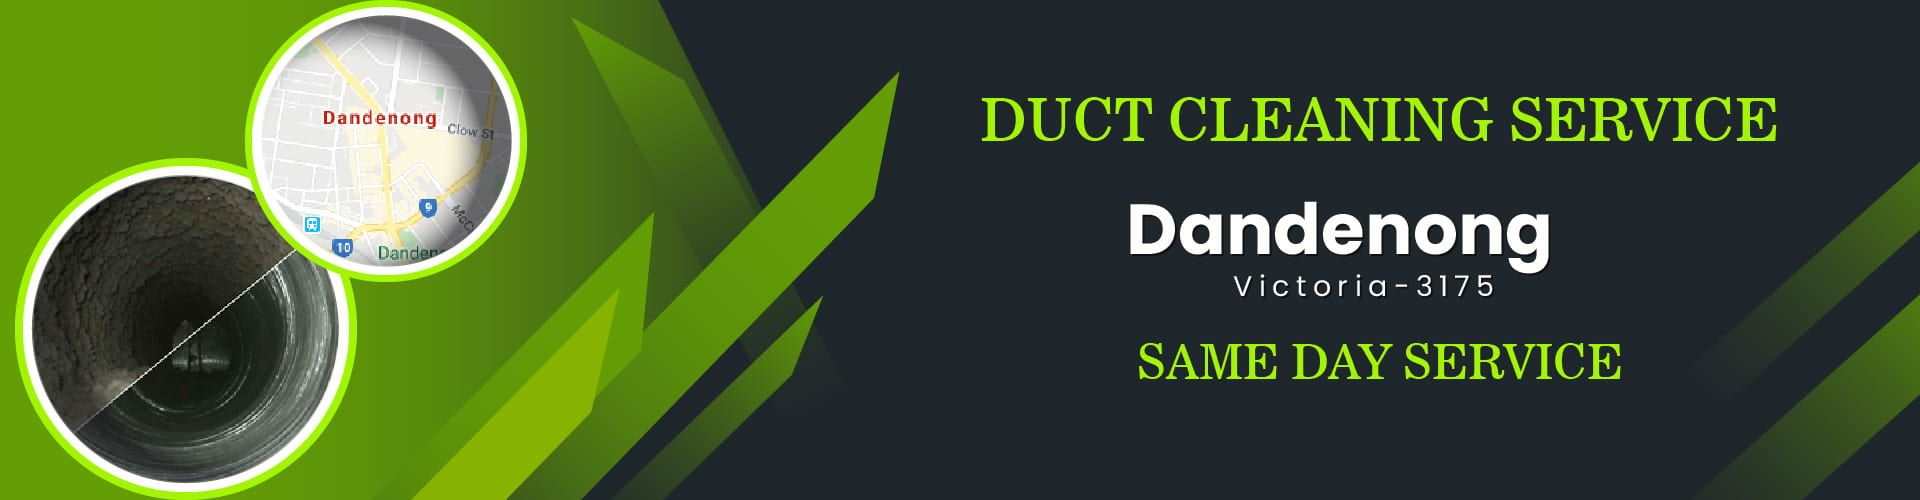 Duct Cleaning Dandenong